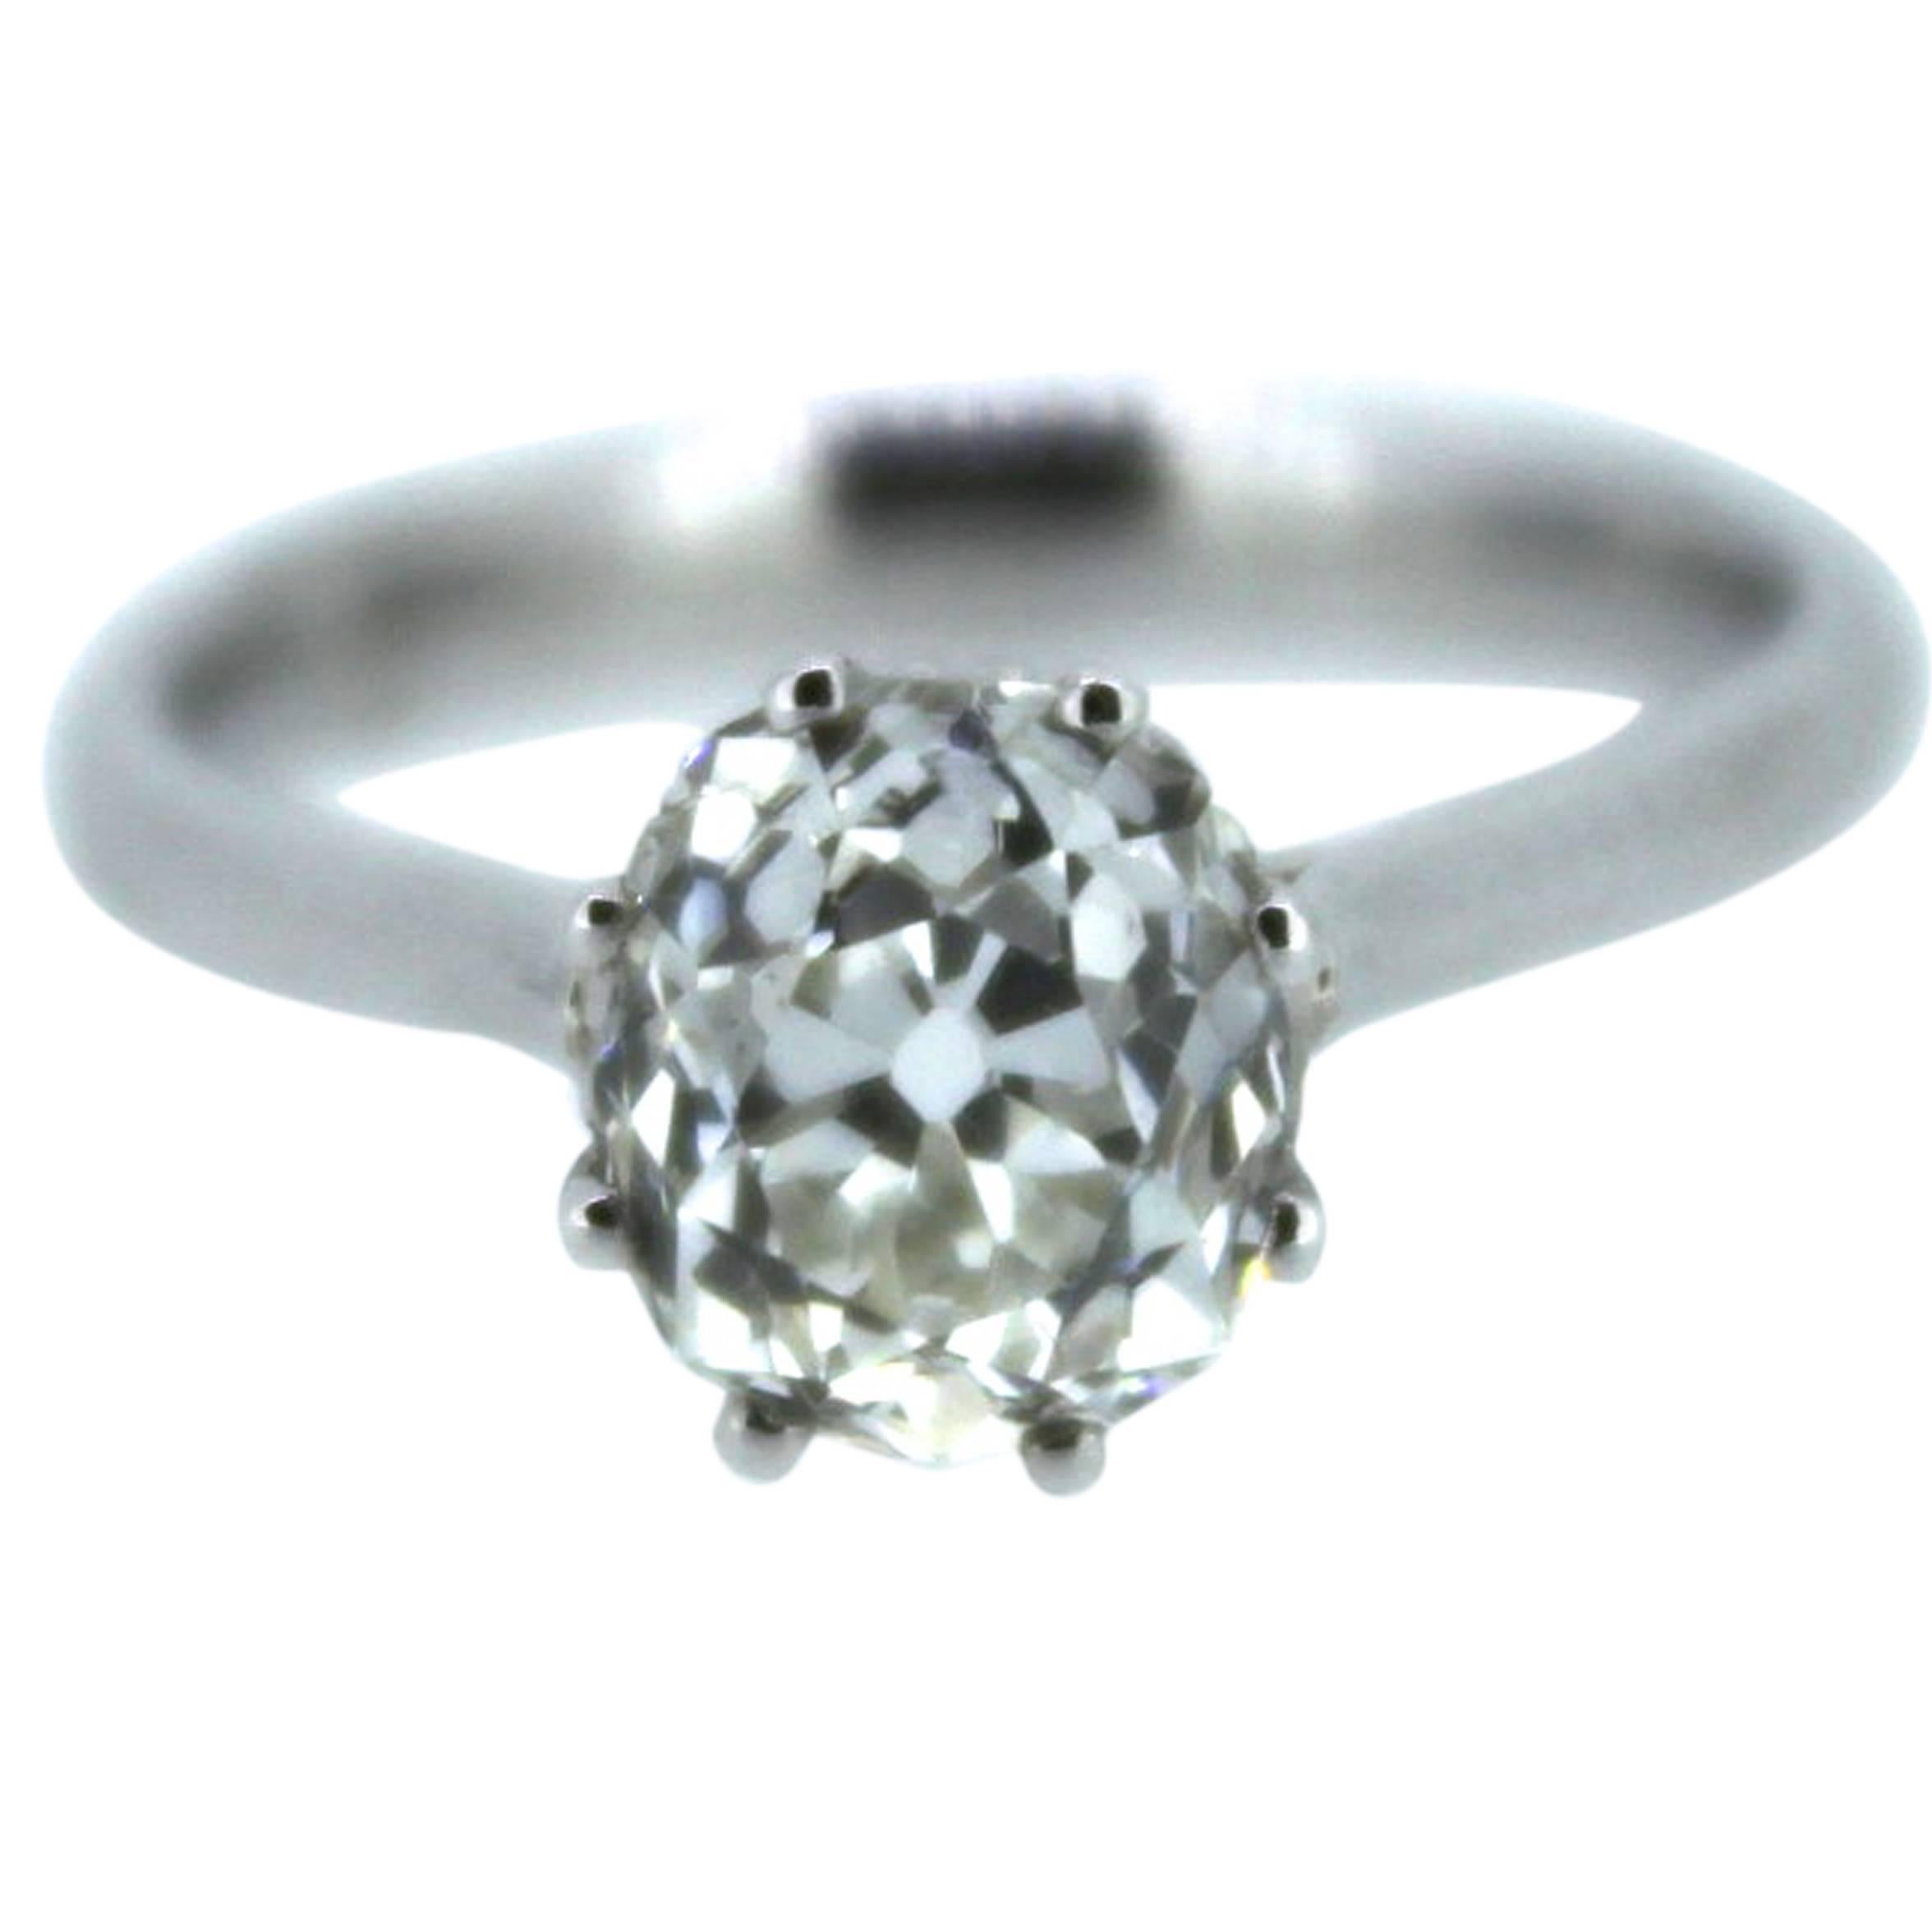 2.14 Carat Old Cut Solitaire Diamond Ring For Sale